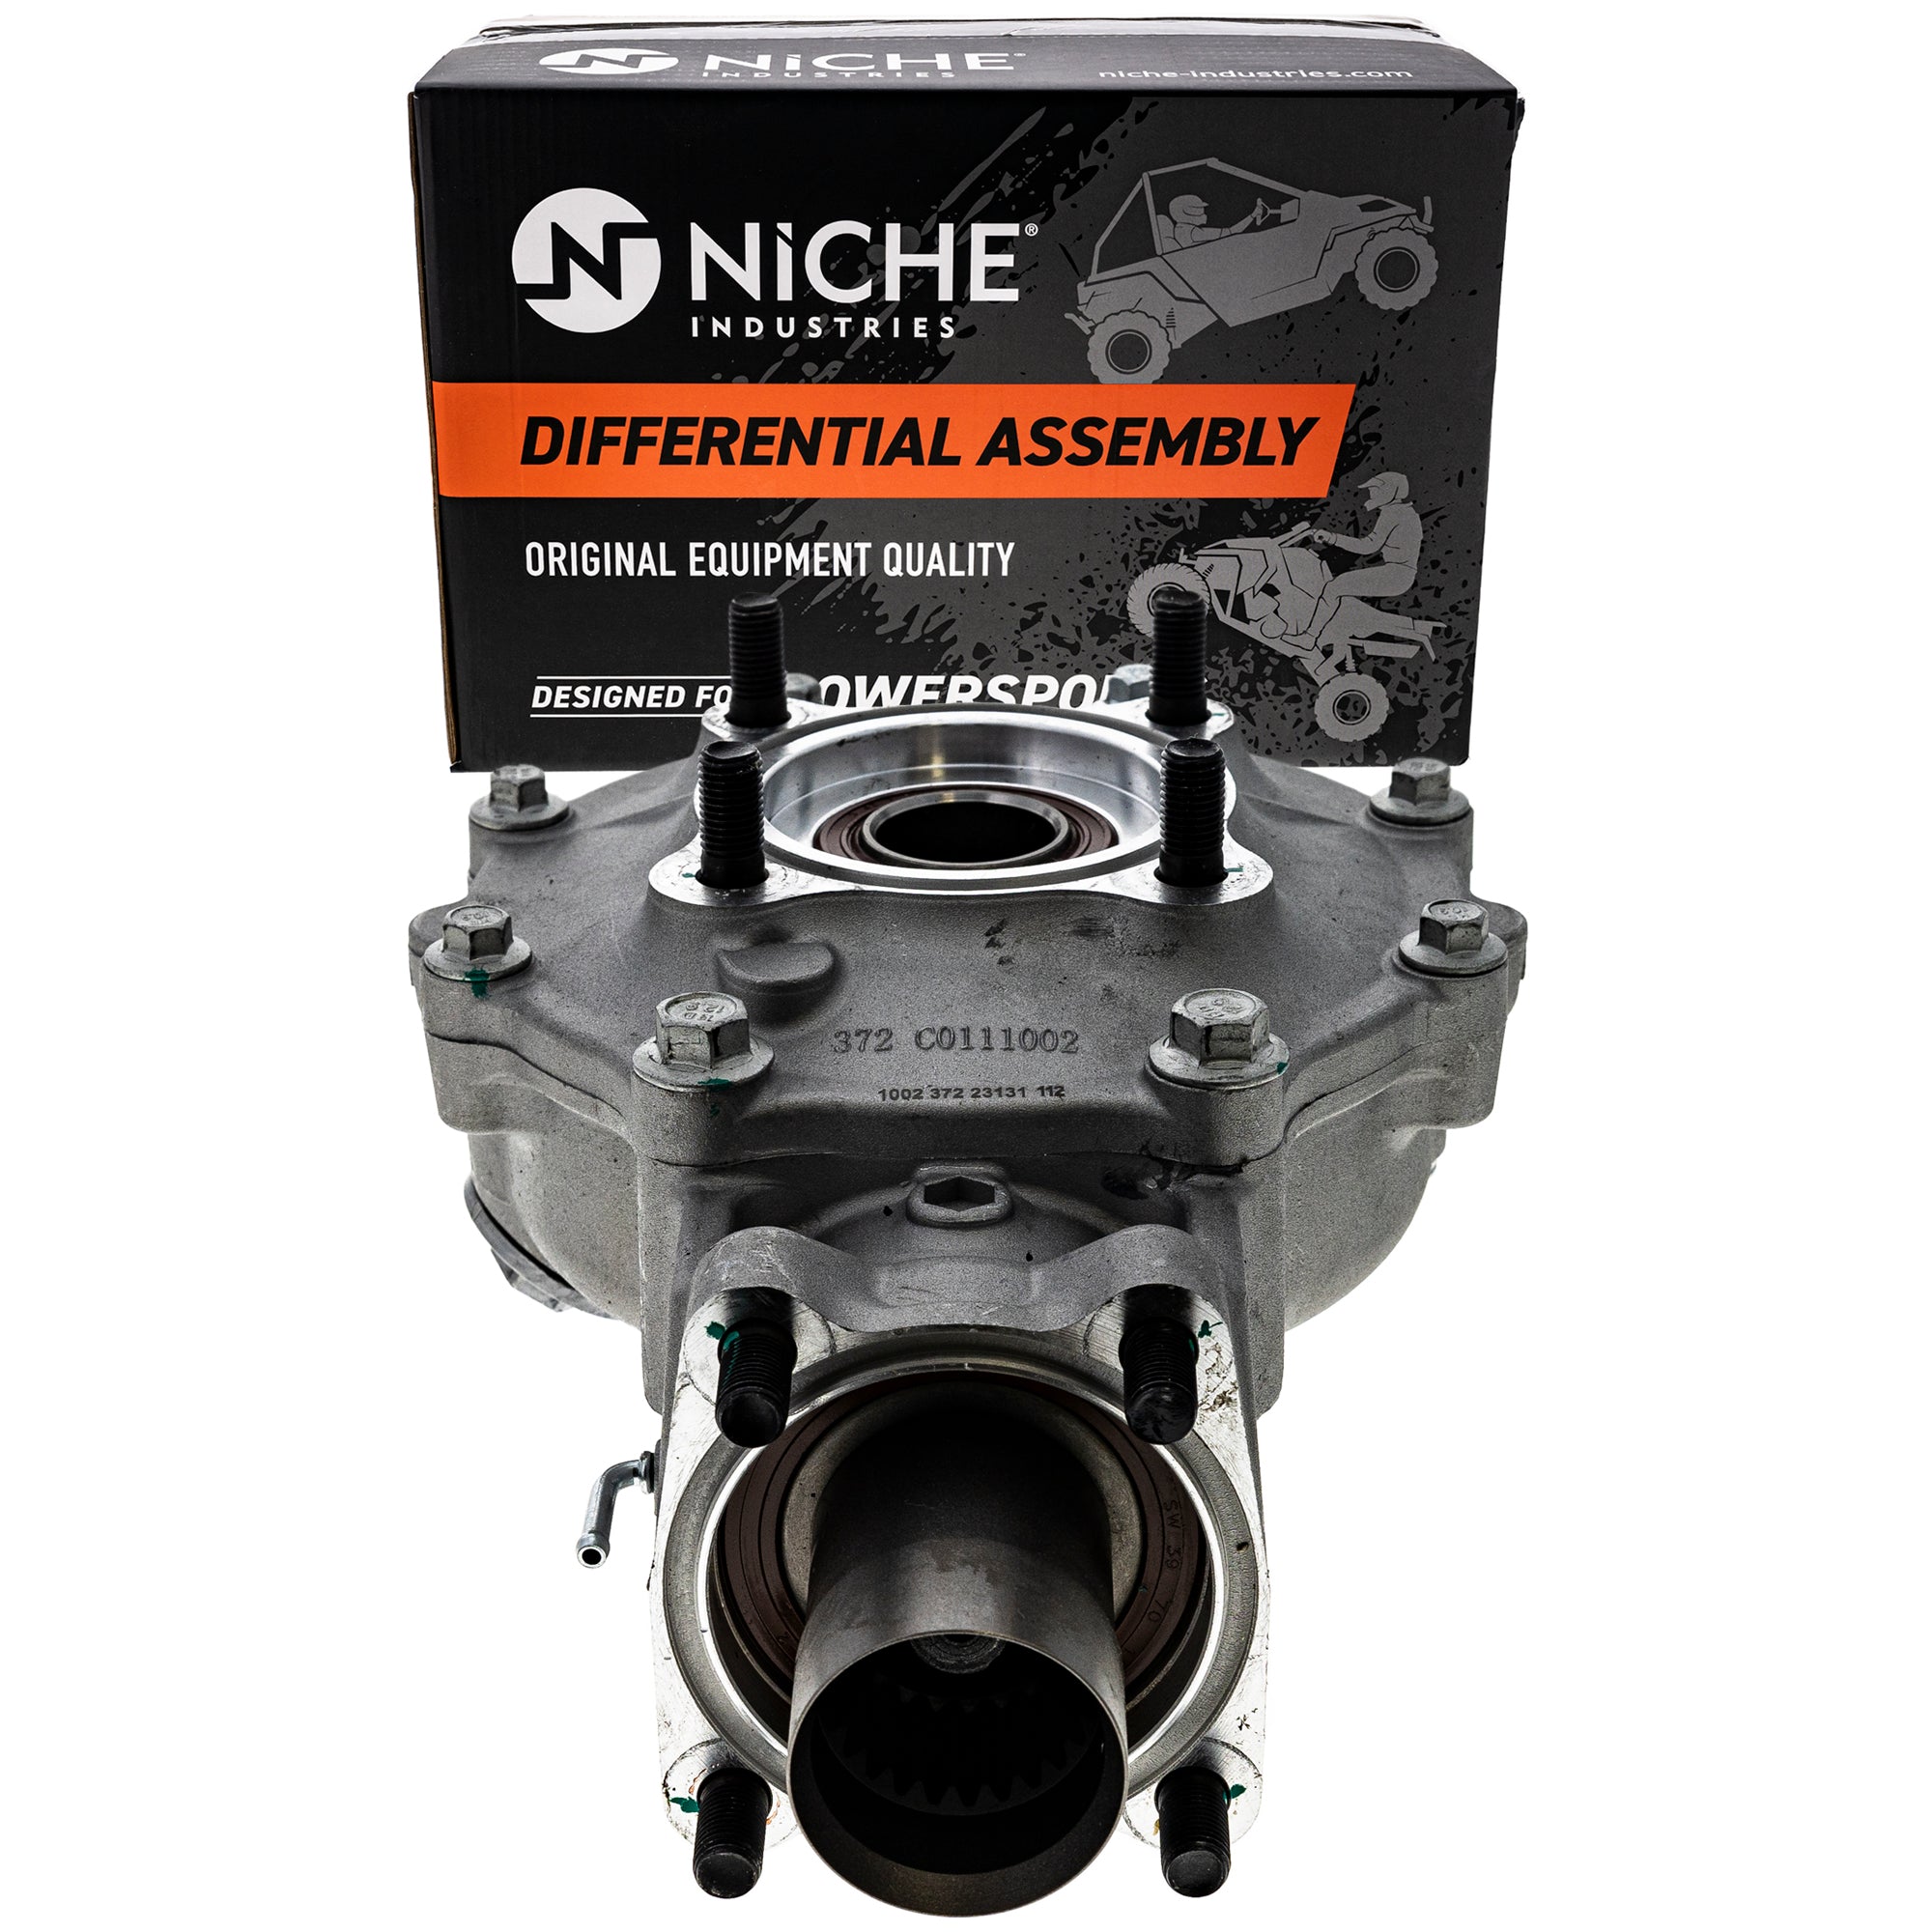 NICHE Rear Differential Assembly 41300-HN0-A00